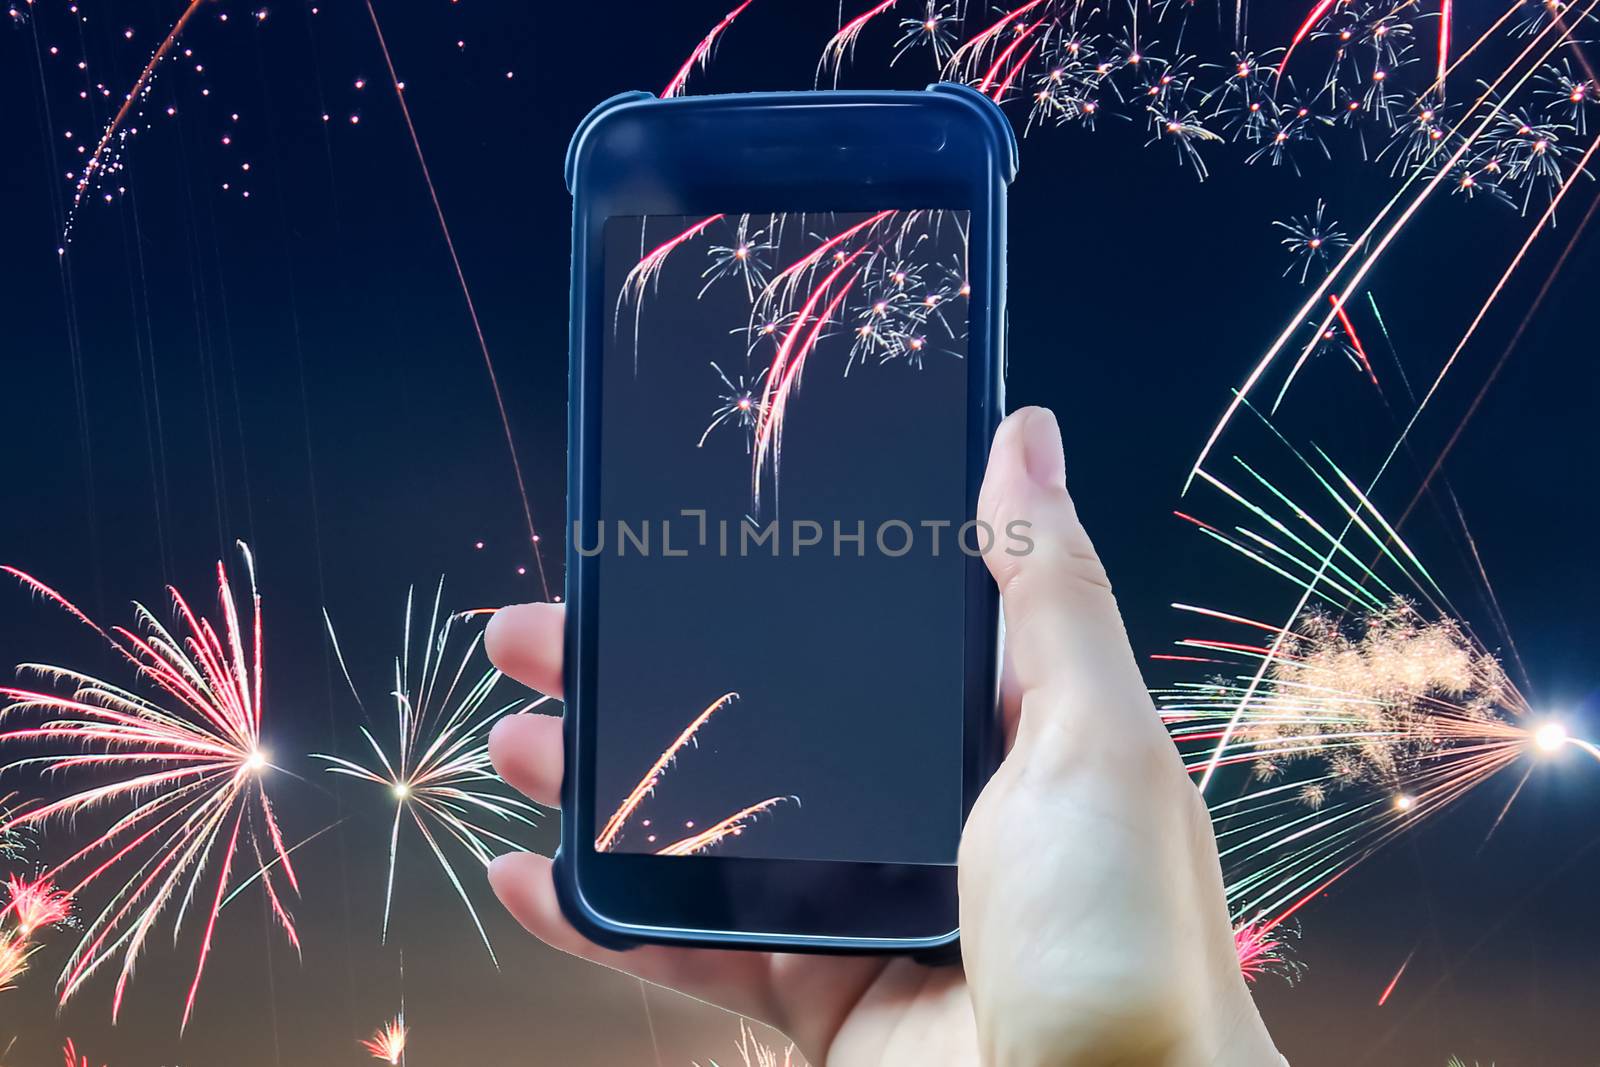 Fireworks composing of a female hand holding a smartphone taking a picture